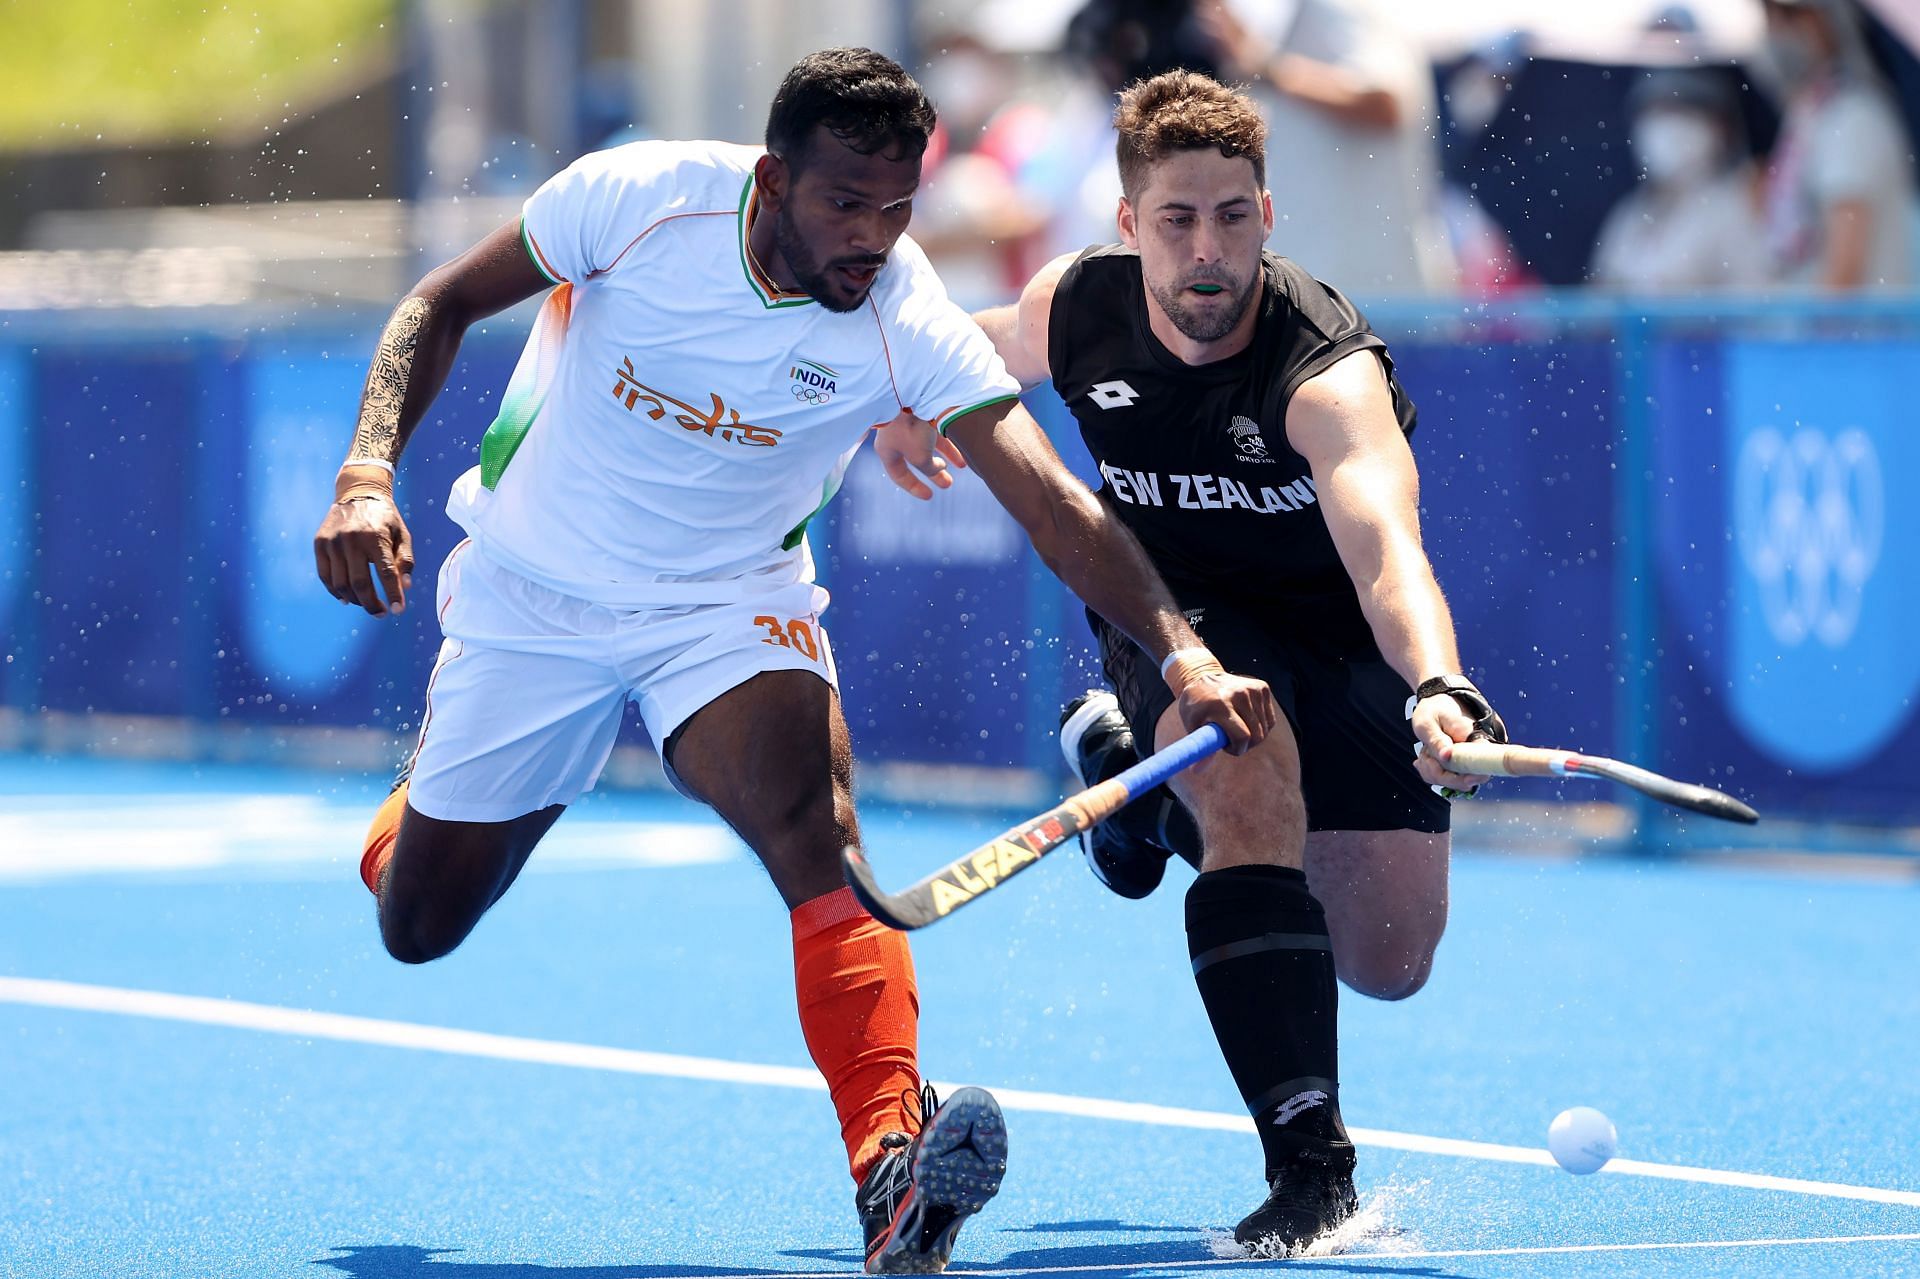 Indian hockey team skipper Amit Rohidas (left) in action. (PC: Getty Images)